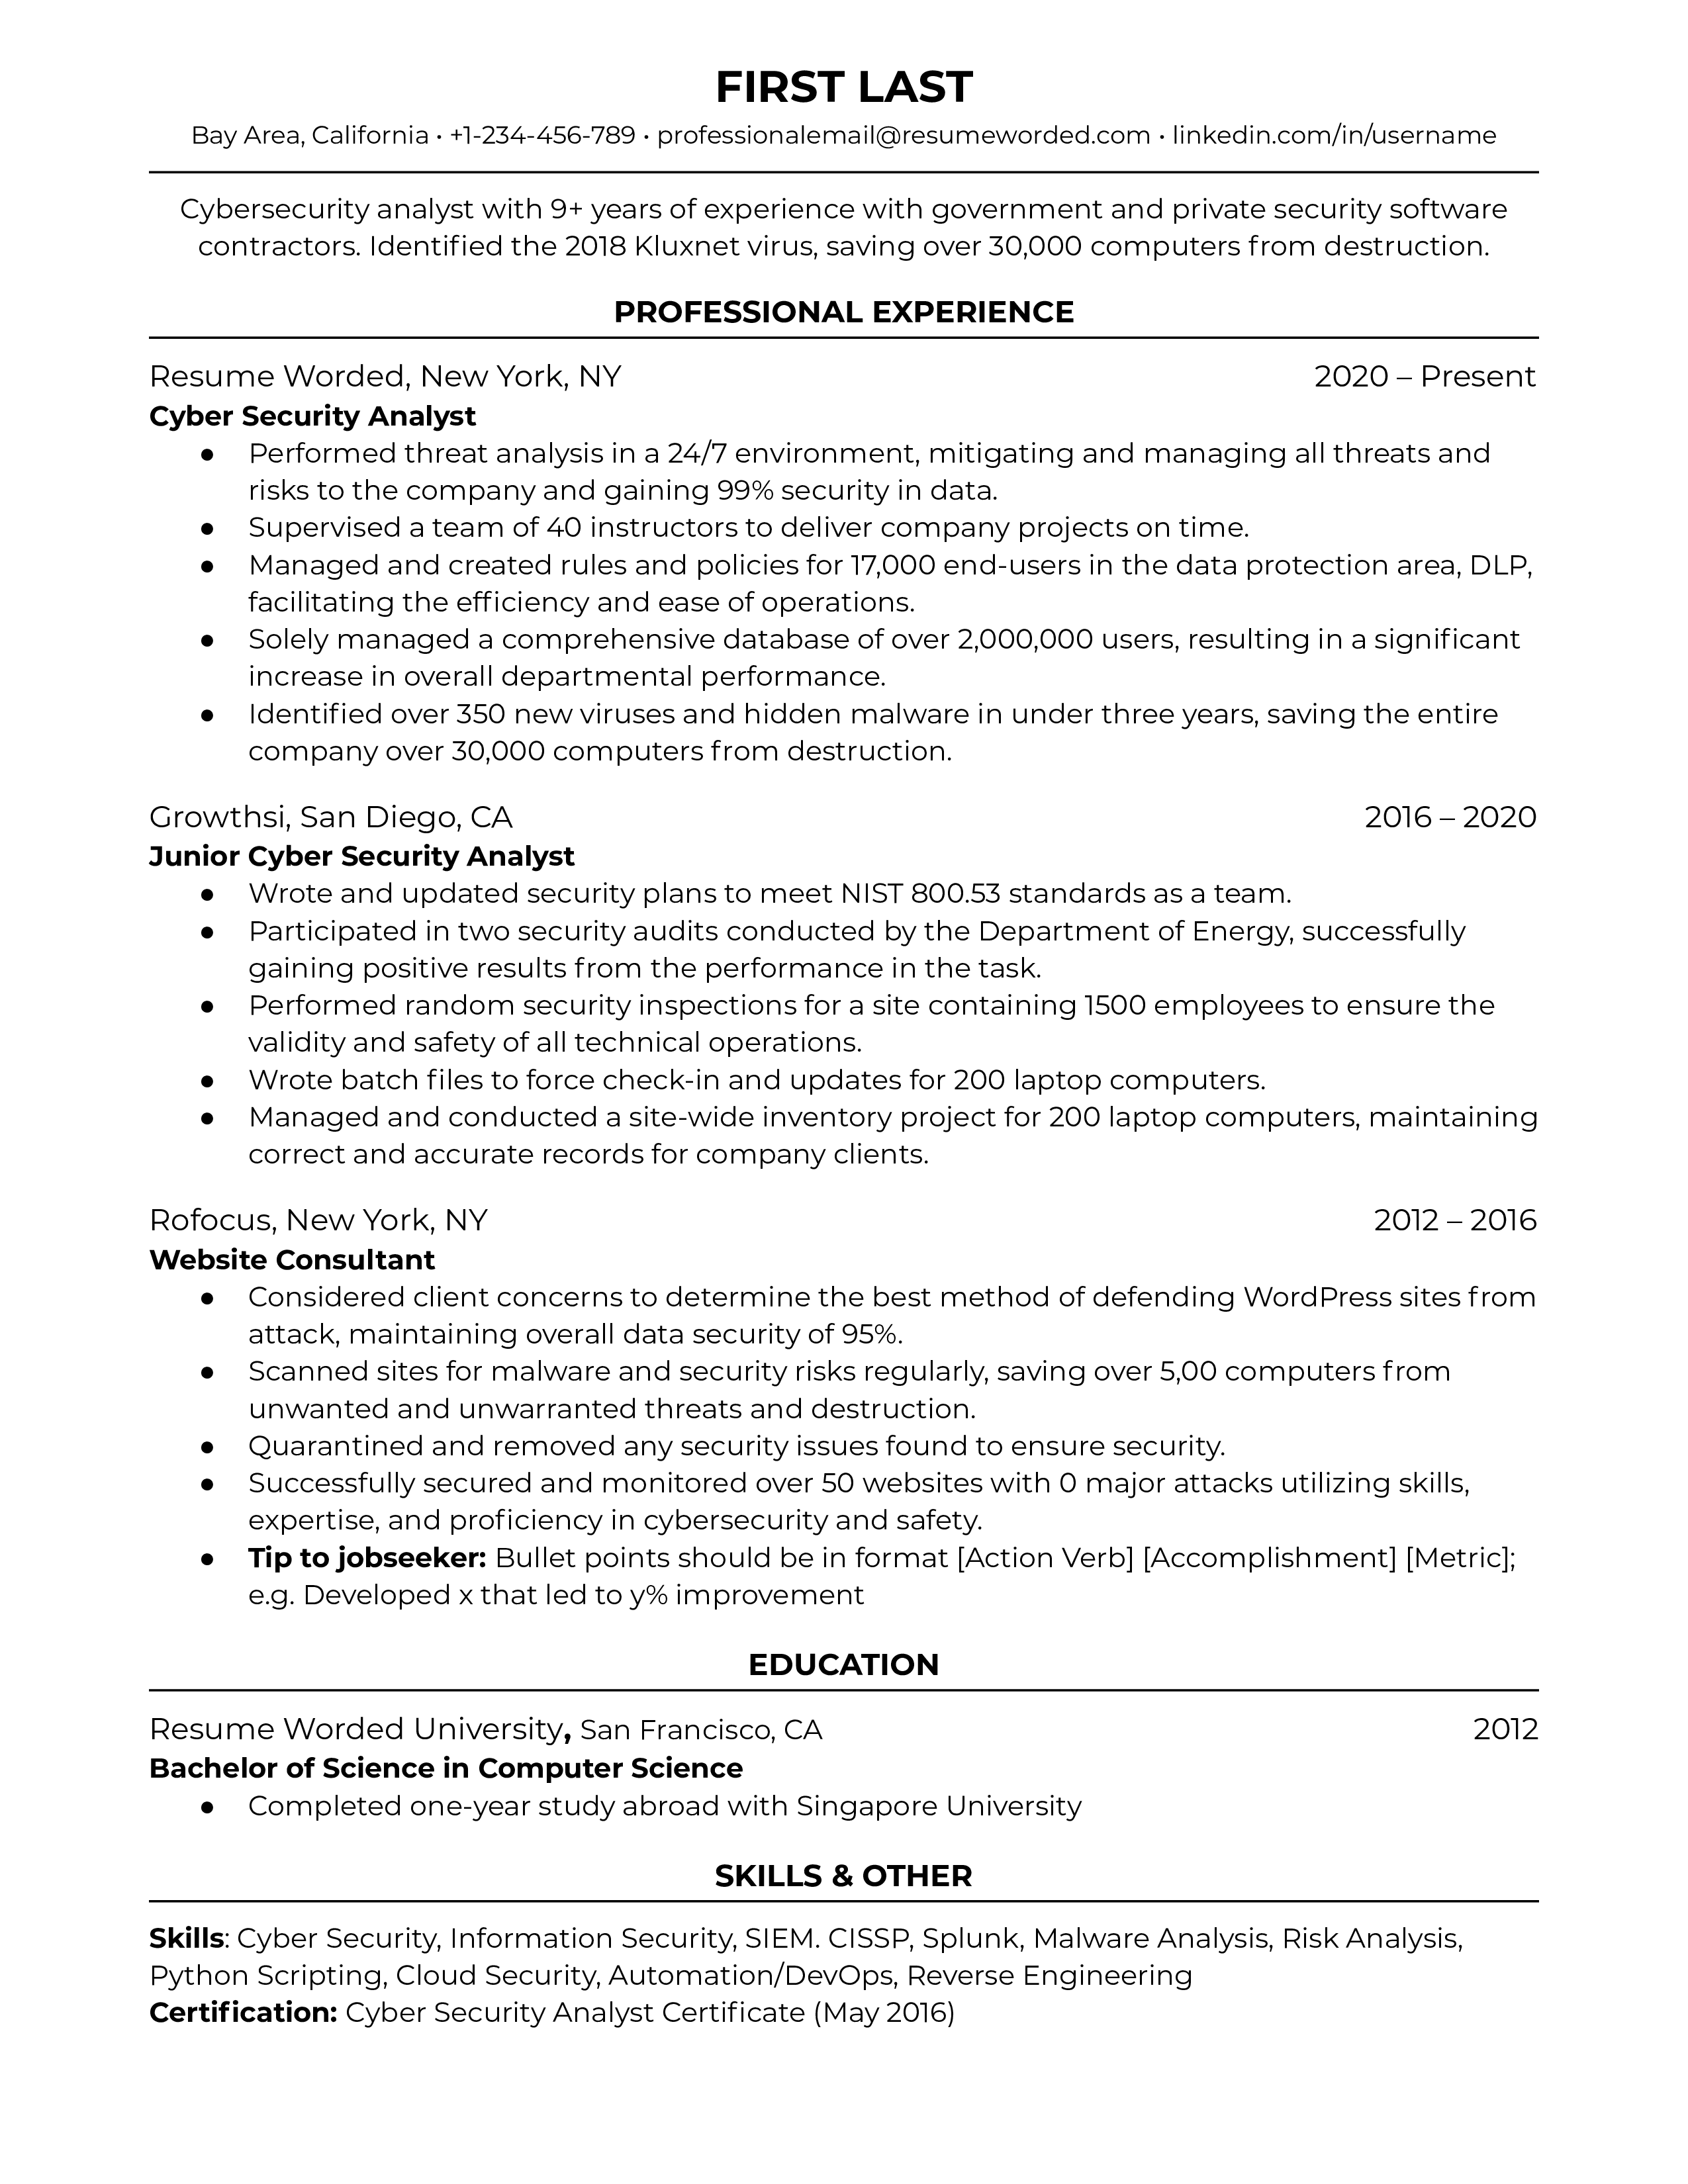 A CV example for a Cyber Security Analyst role.